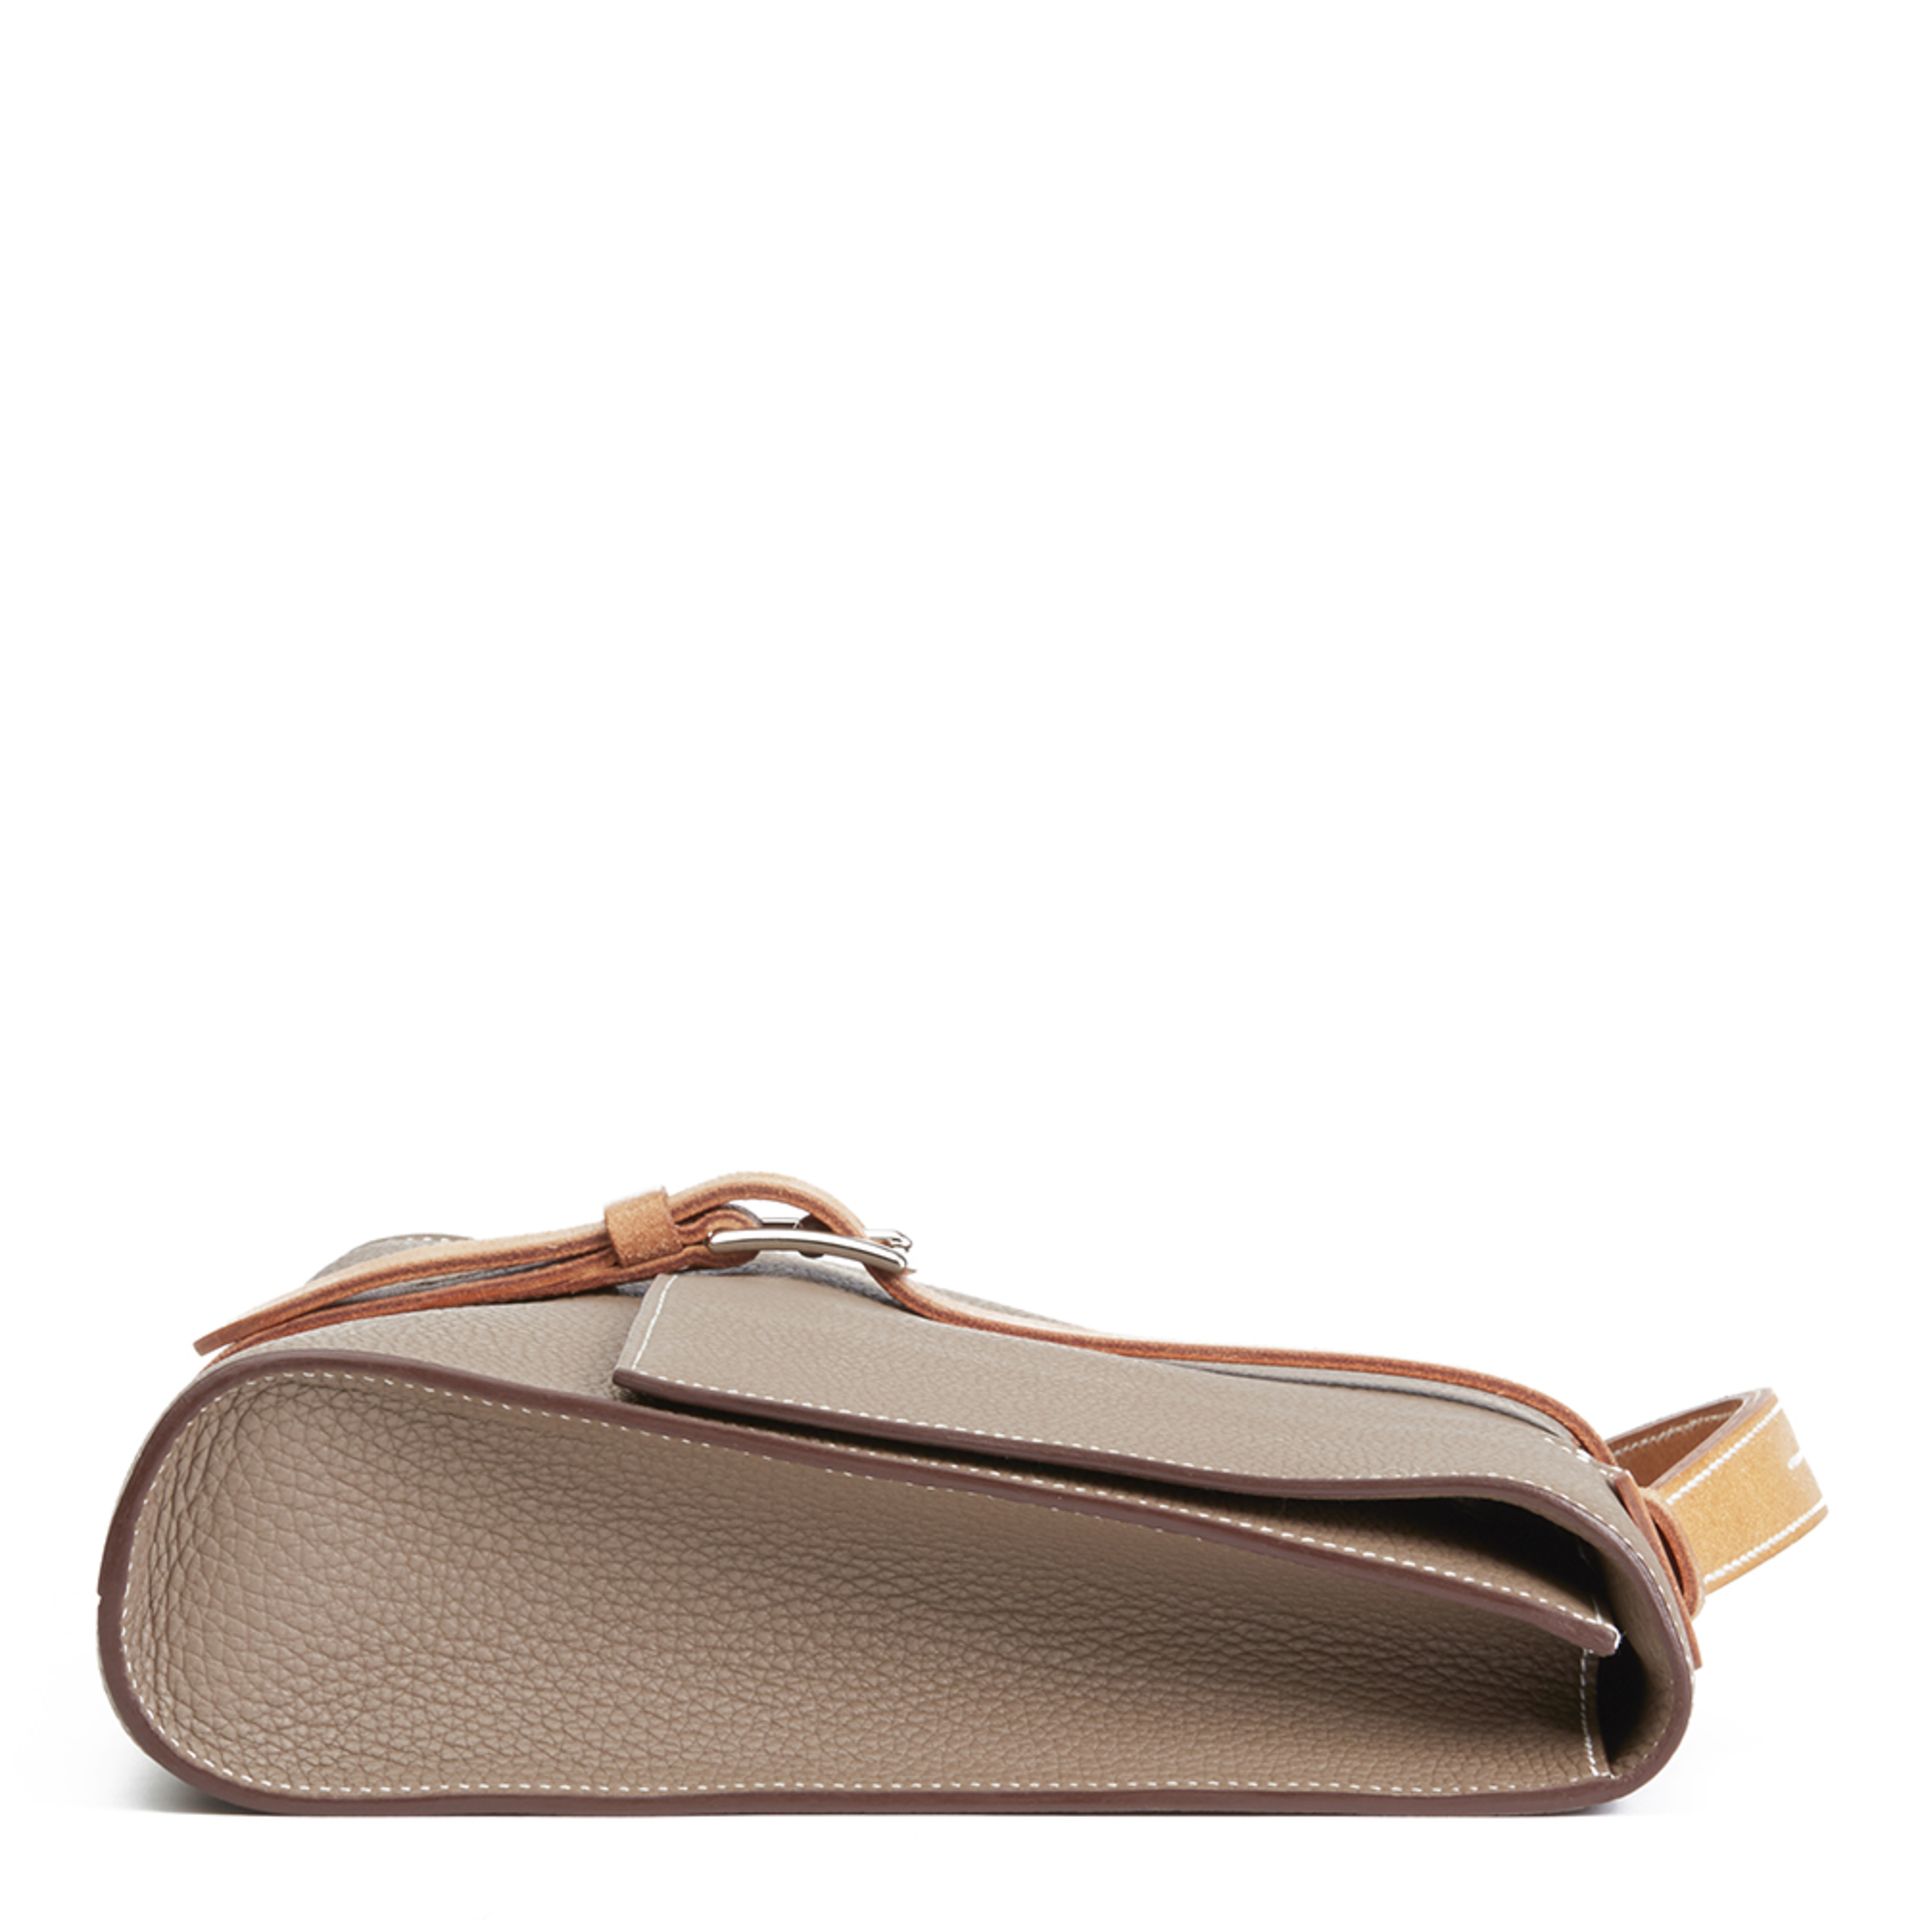 Etoupe Fjord Leather & Hunter Calfskin Leather Etriviere II - Image 2 of 10